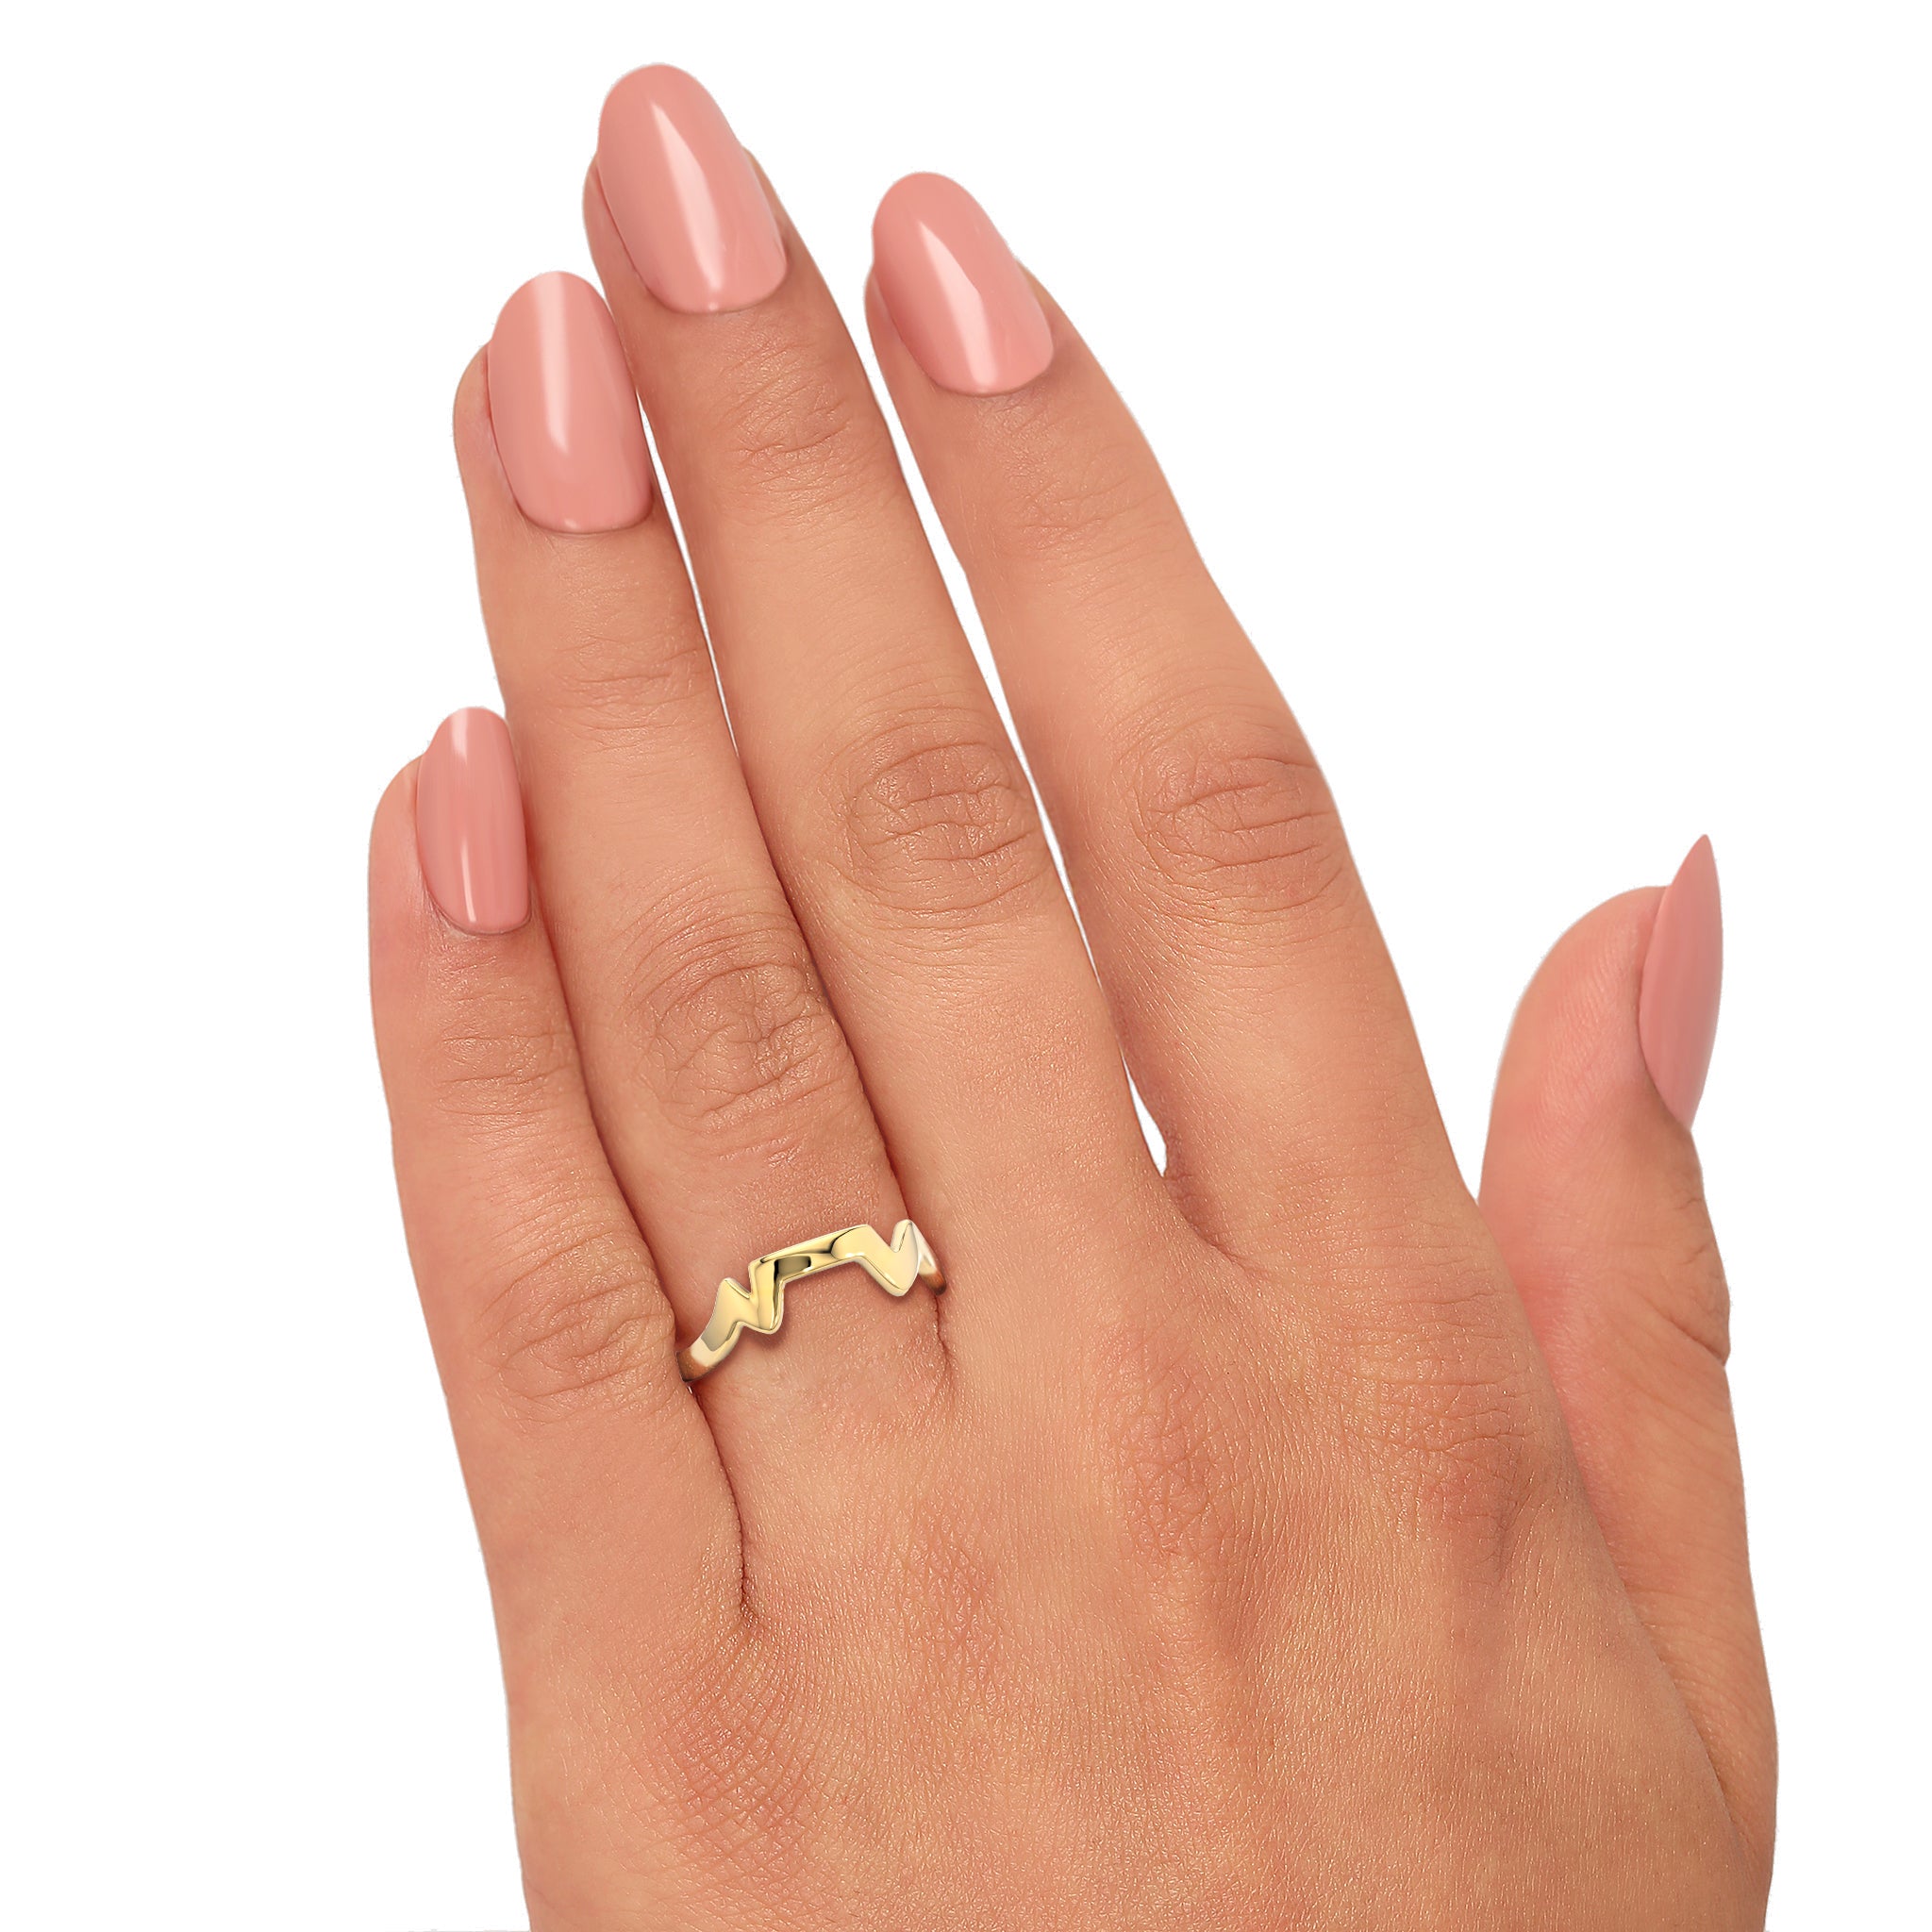 Shimansky - Women Wearing the Table Mountain Ring Crafted in 14K Yellow Gold